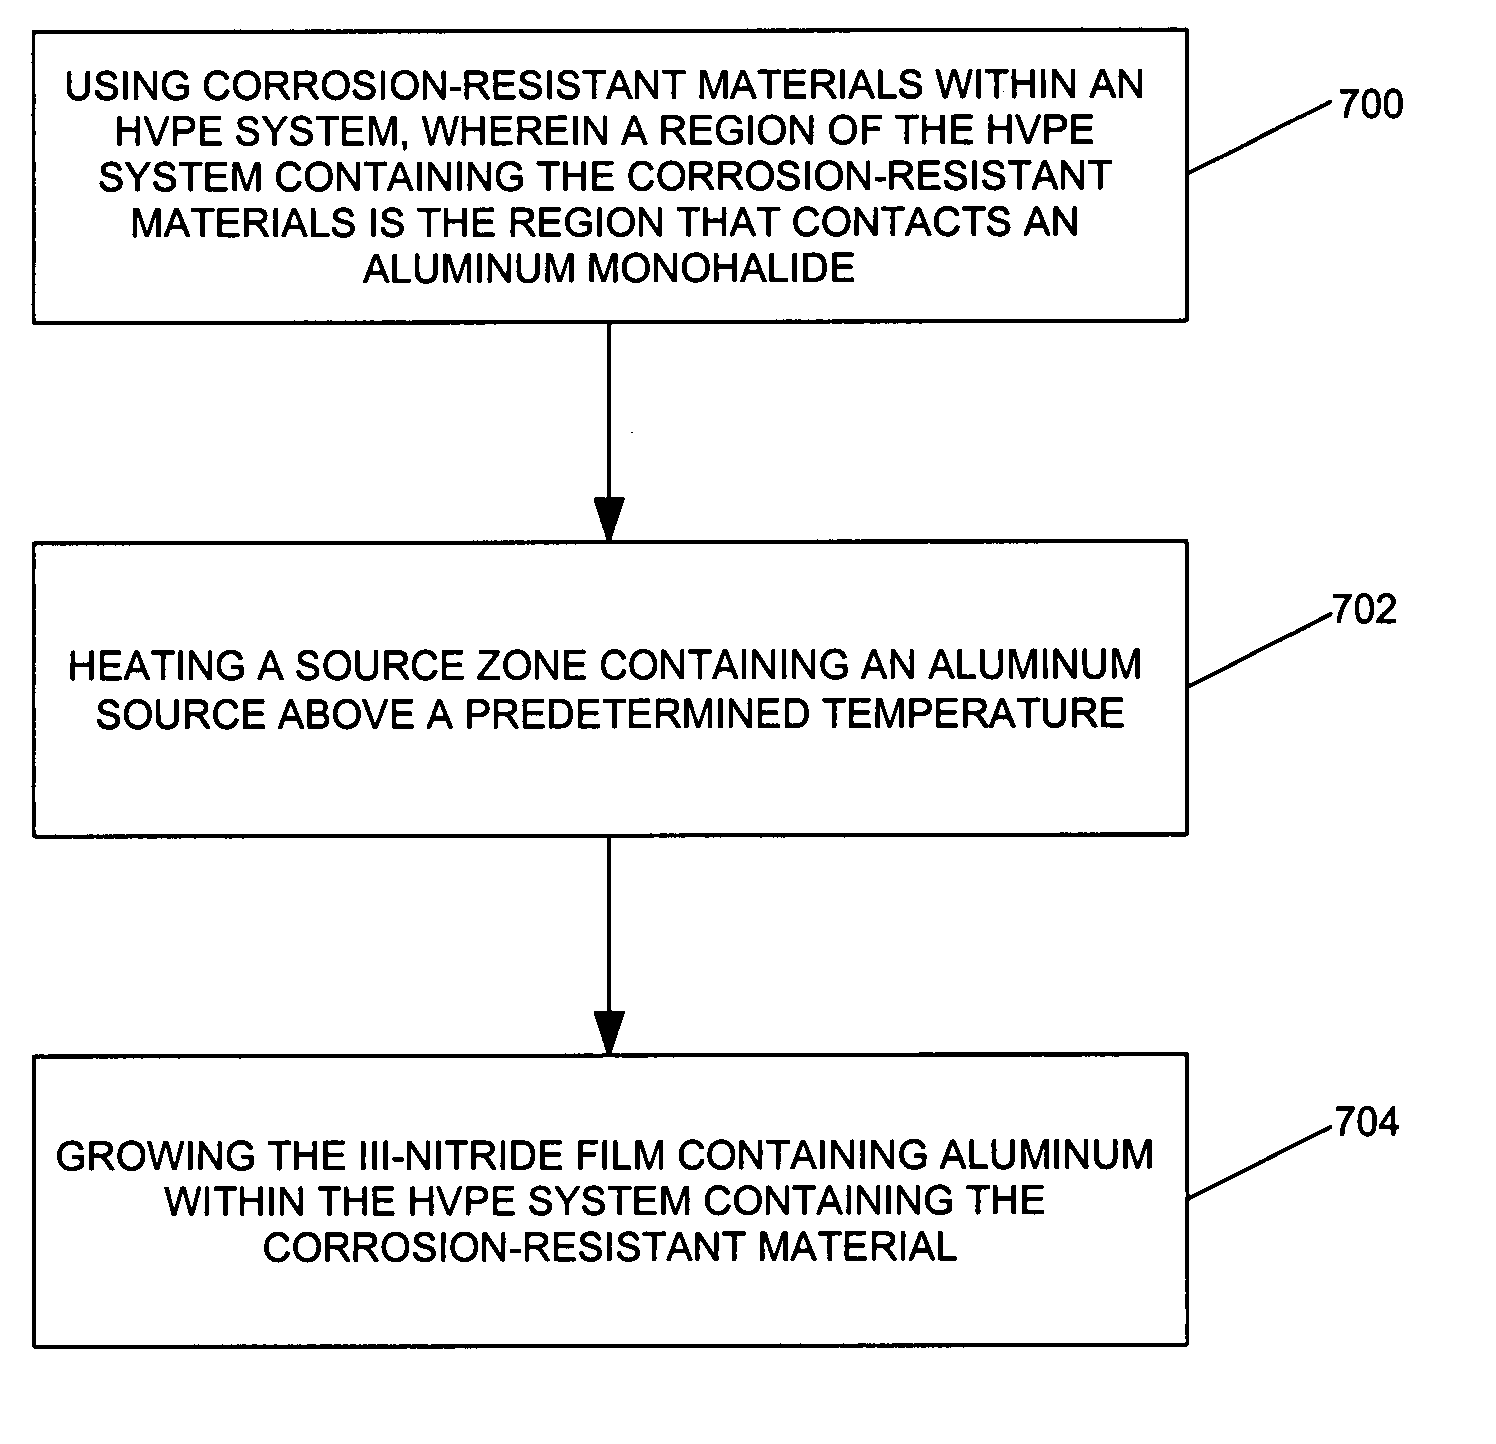 Method and materials for growing III-nitride semiconductor compounds containing aluminum